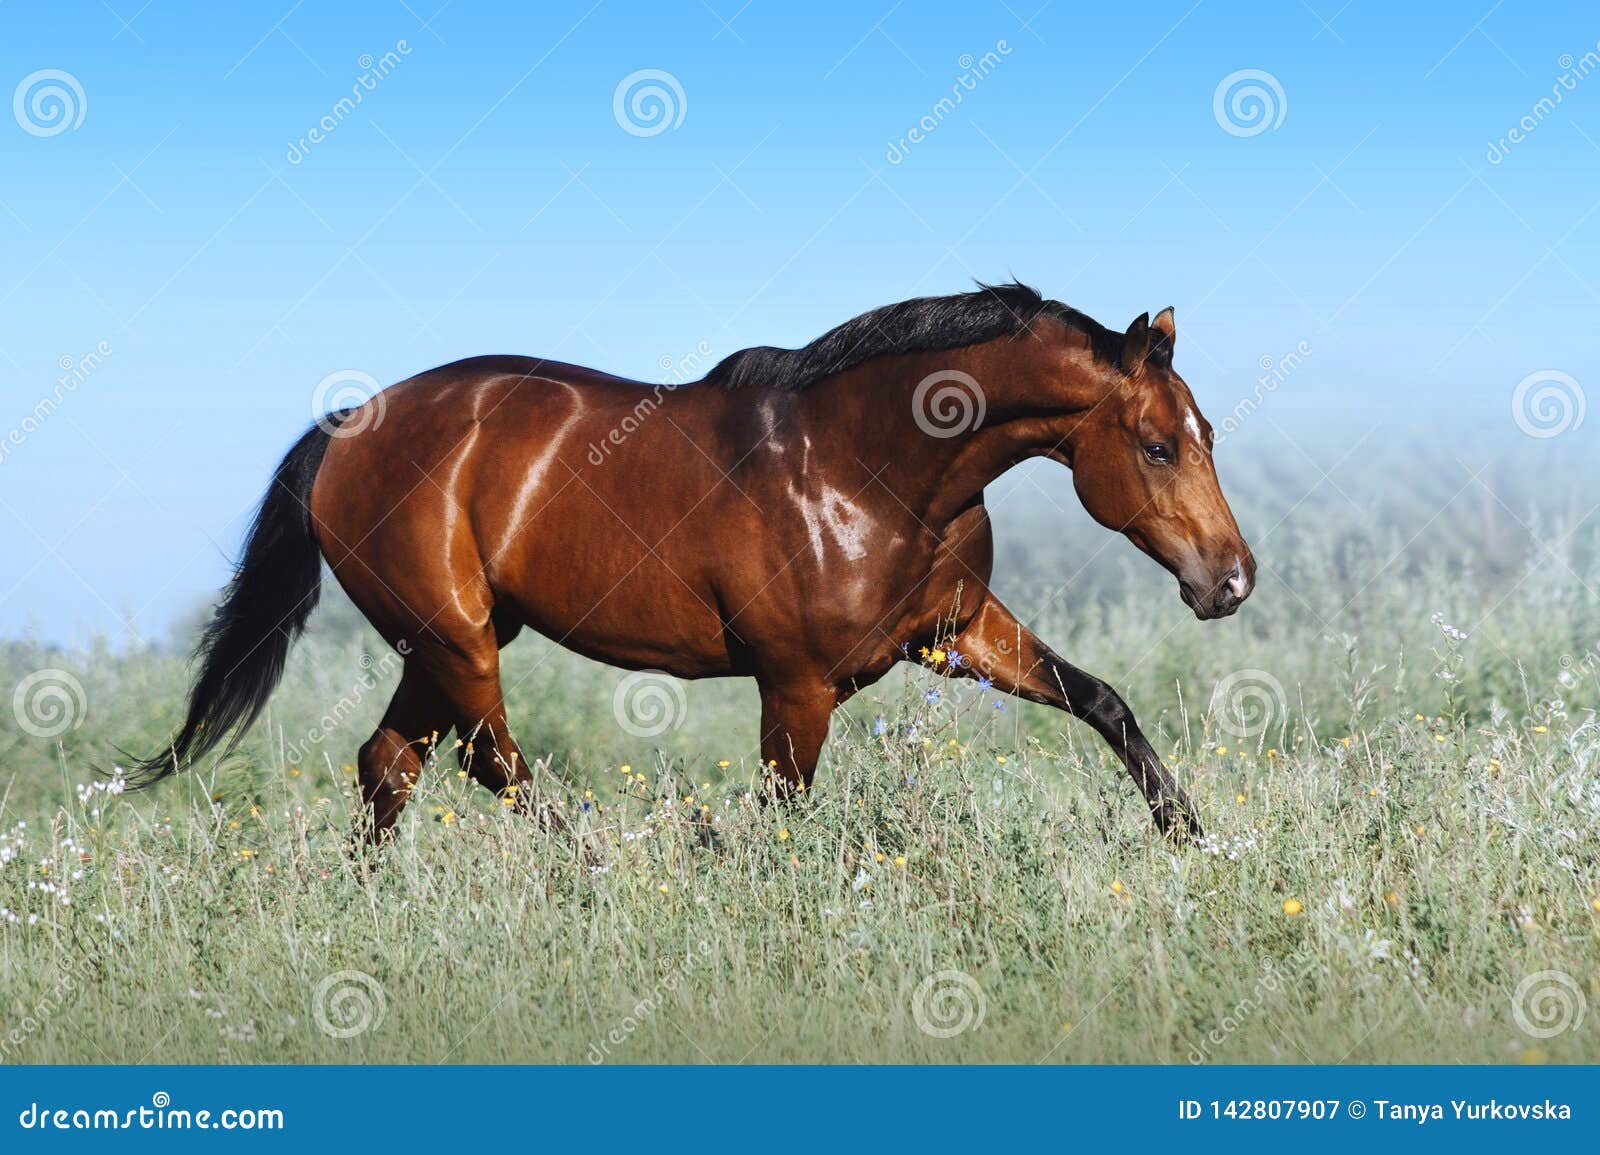 a beautiful bay horse jumps in a field against a blue sky.